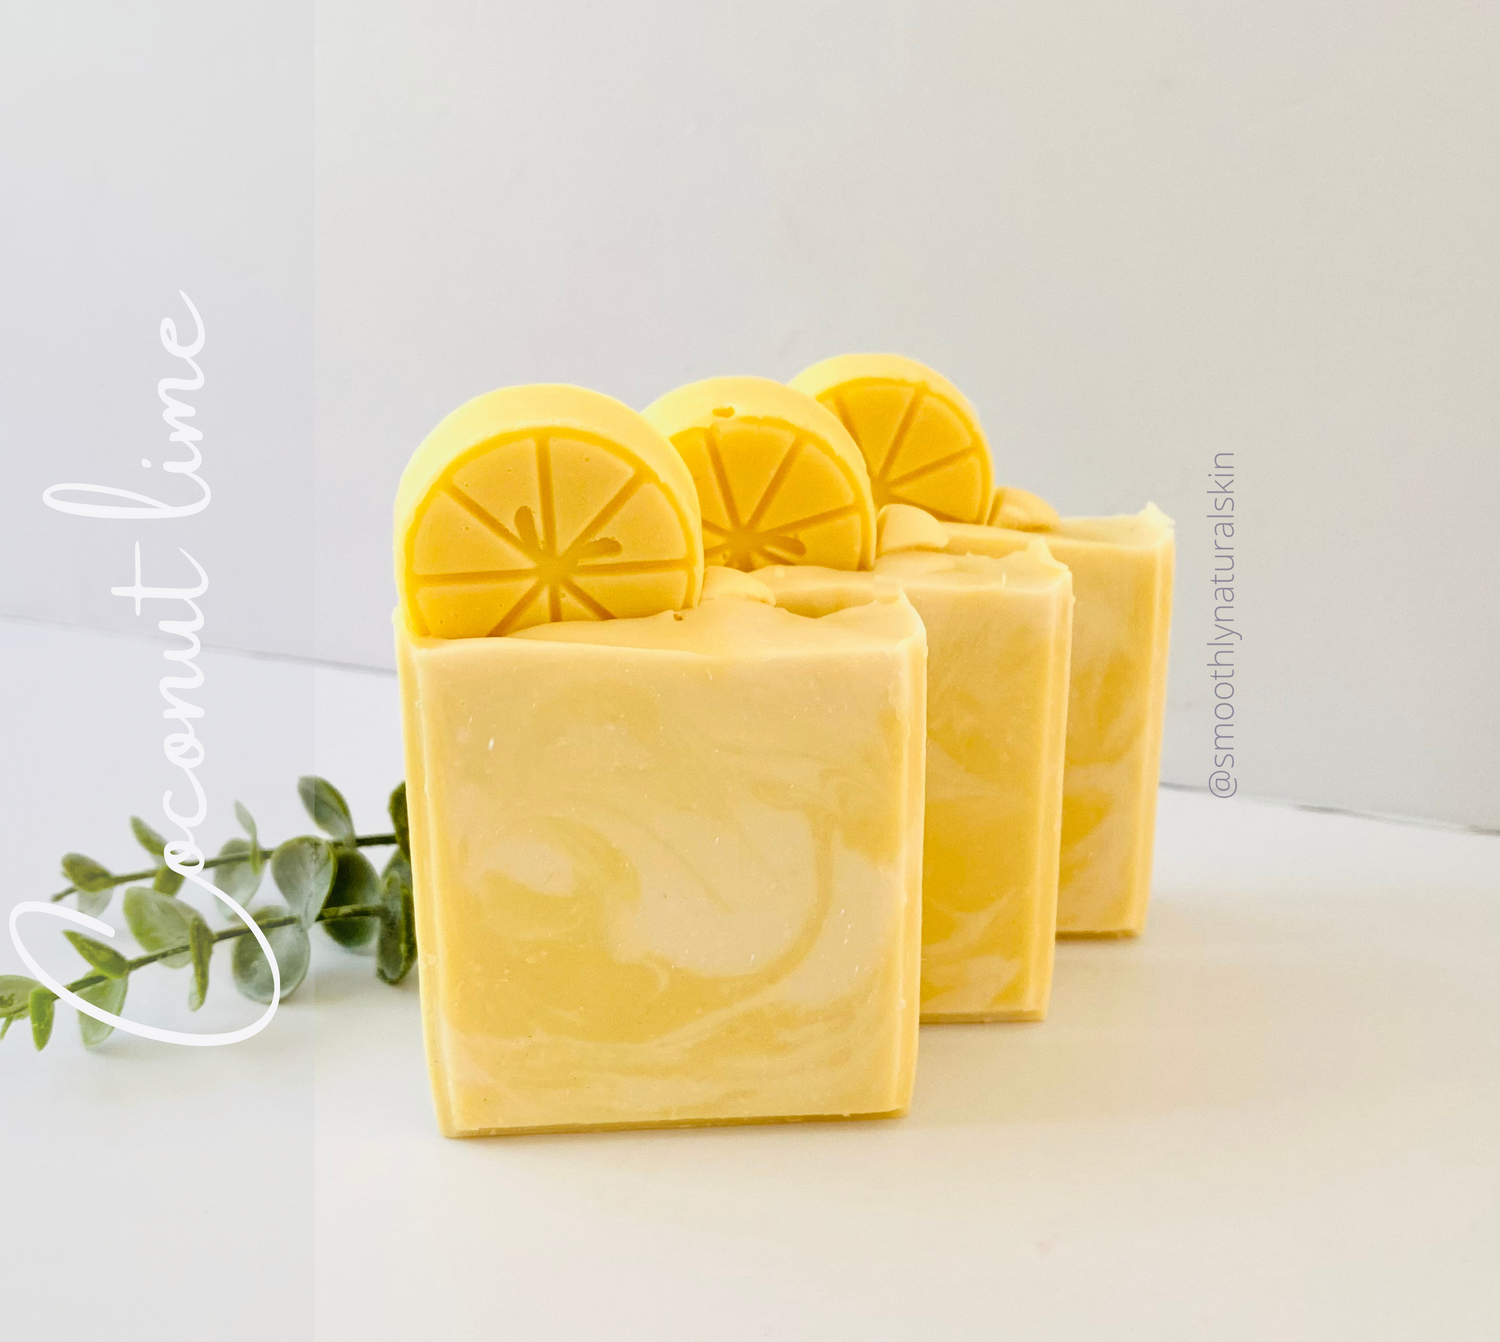 Coconut Lime Soap; this soap is scented with Coconut lime fragrance. This fragrance is a best seller; is a fresh fragrance. It has notes of lime, grapefruit, lemon with a floral undertone of jasmine, on a background of musk and sandalwood.